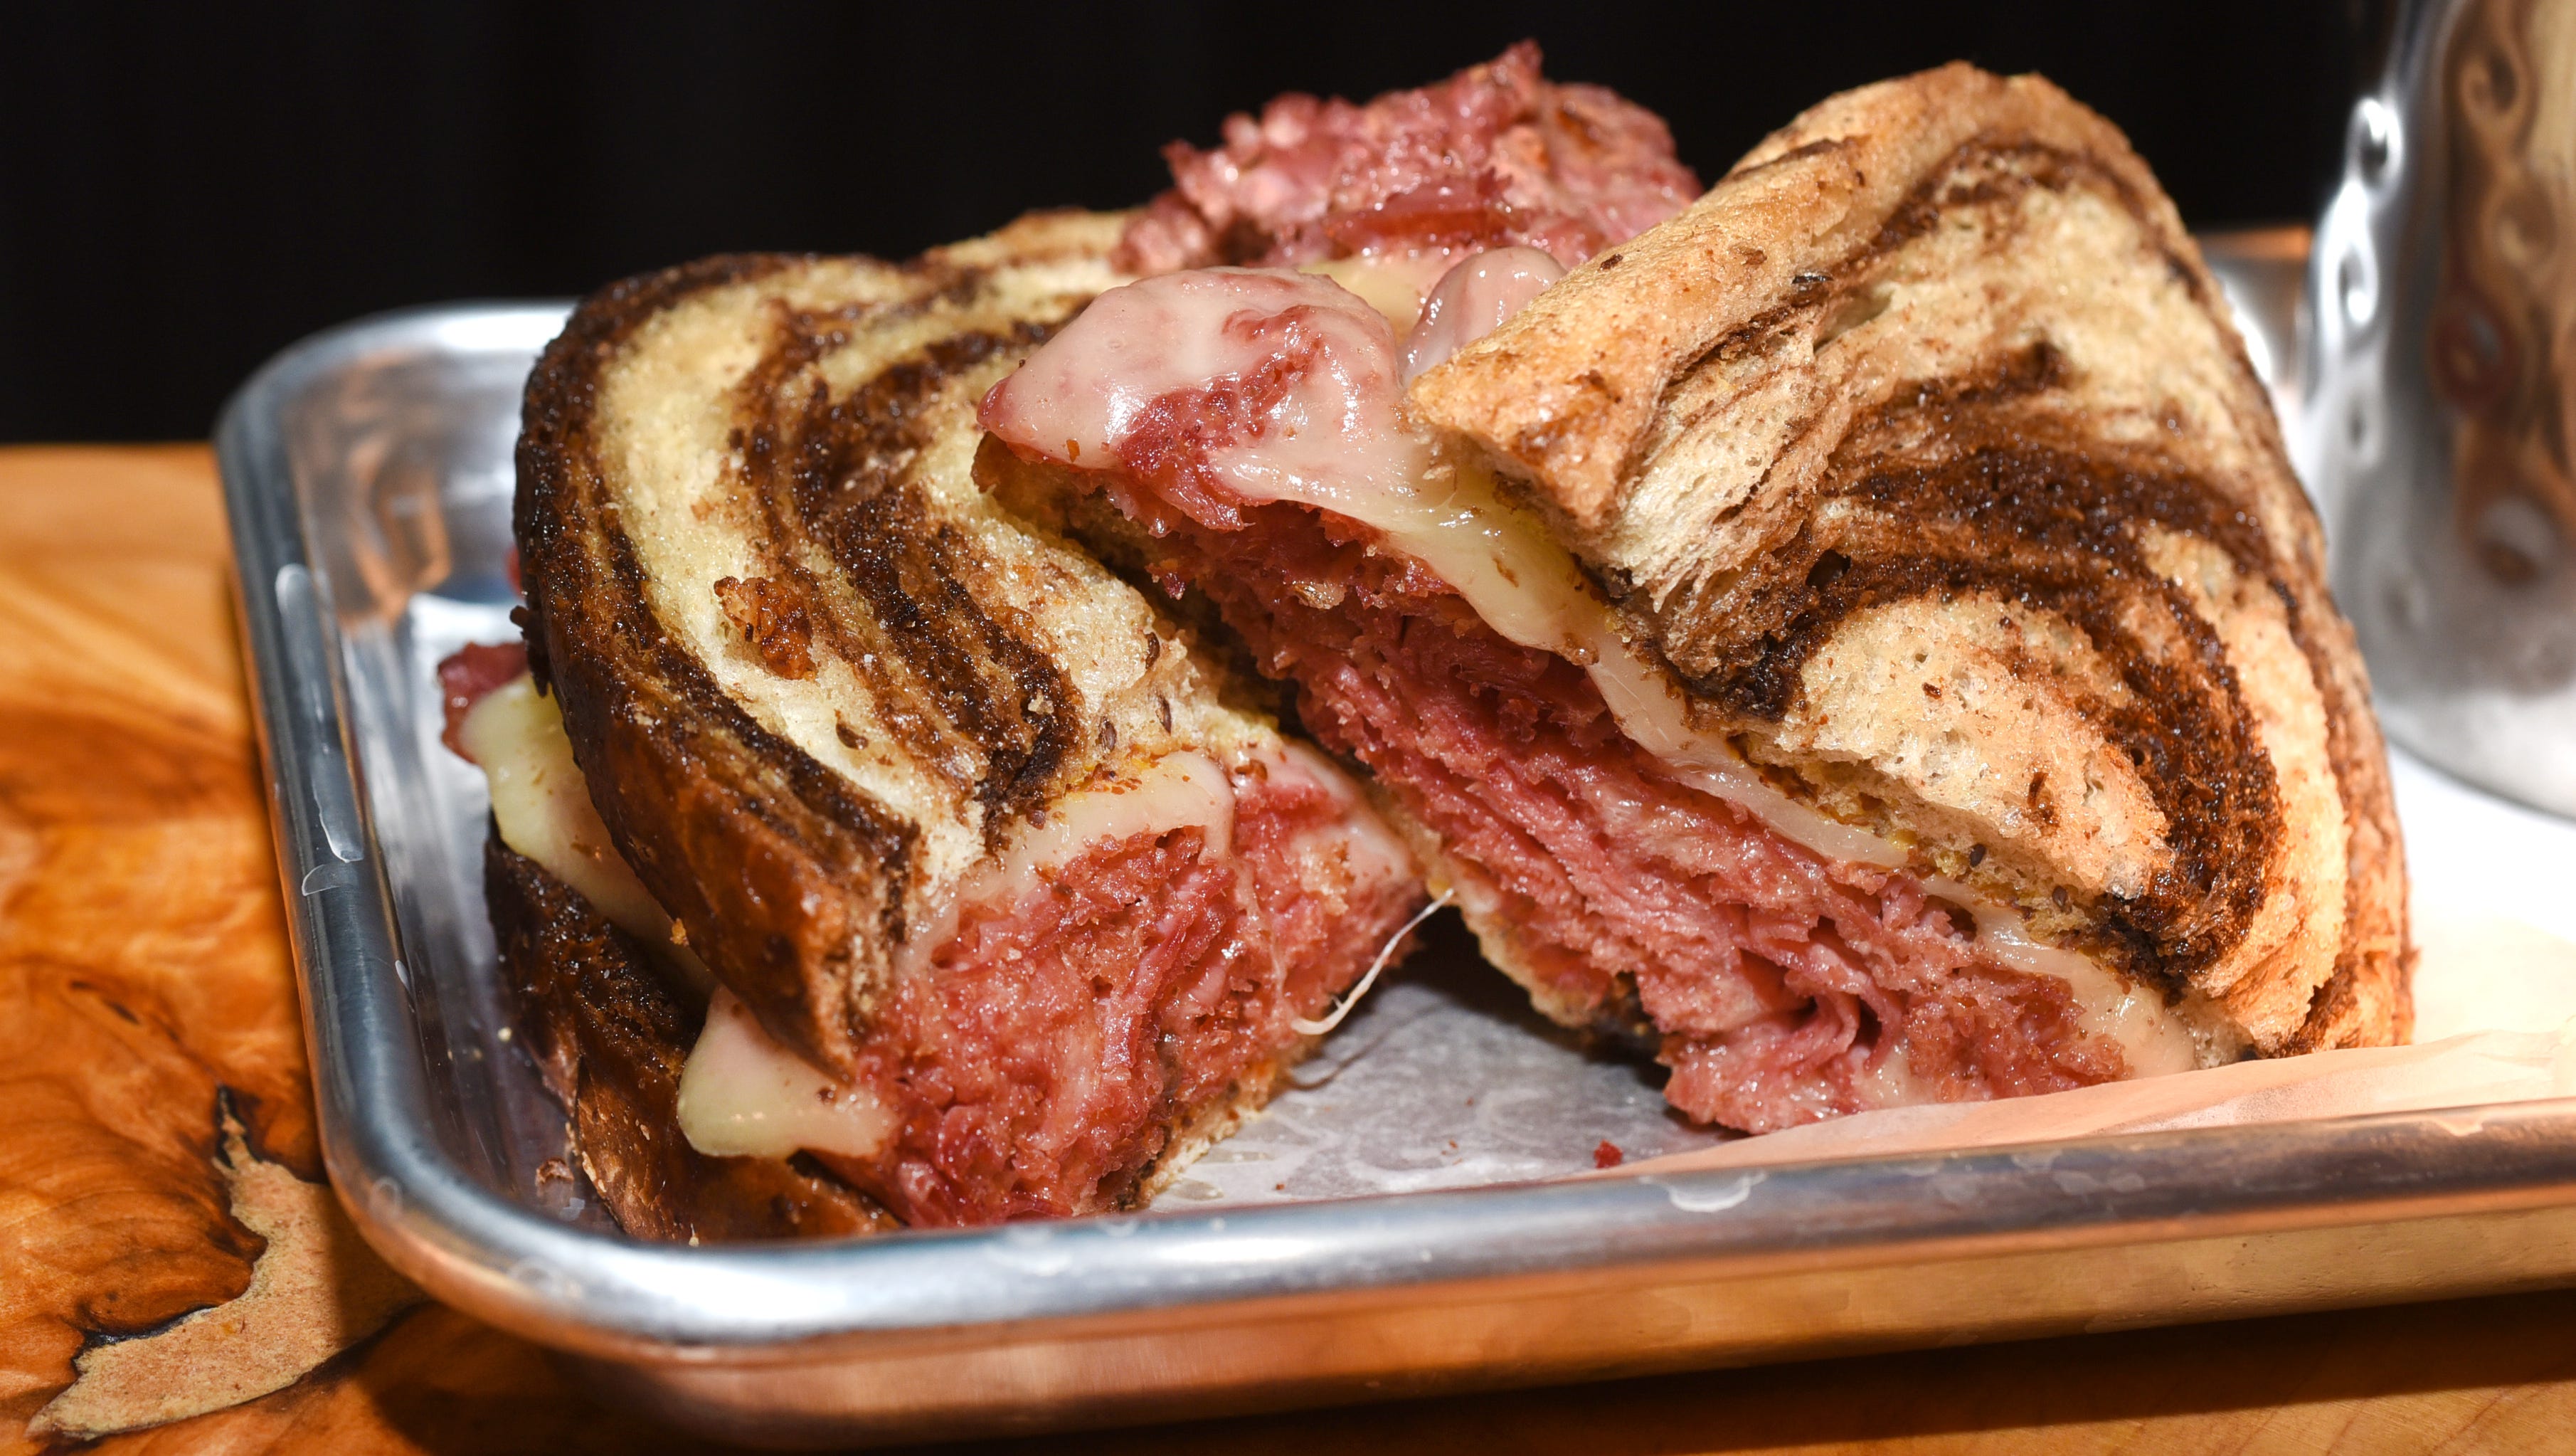 The Sy Ginsberg's Corned Beef Sandwich was presented during a media event.